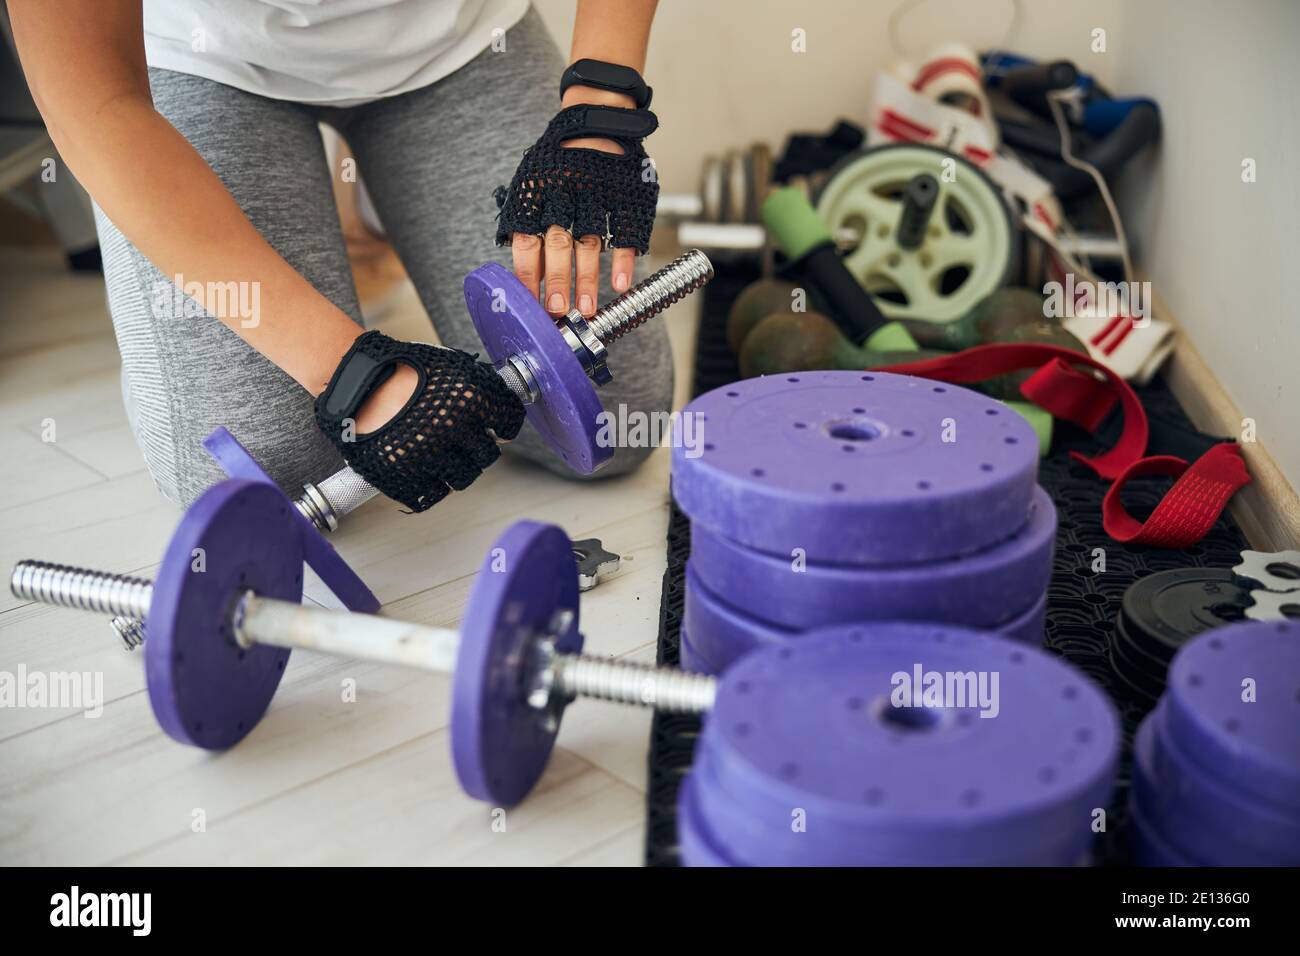 Female bodybuilder preparing for the weight-lifting workout Stock Photo